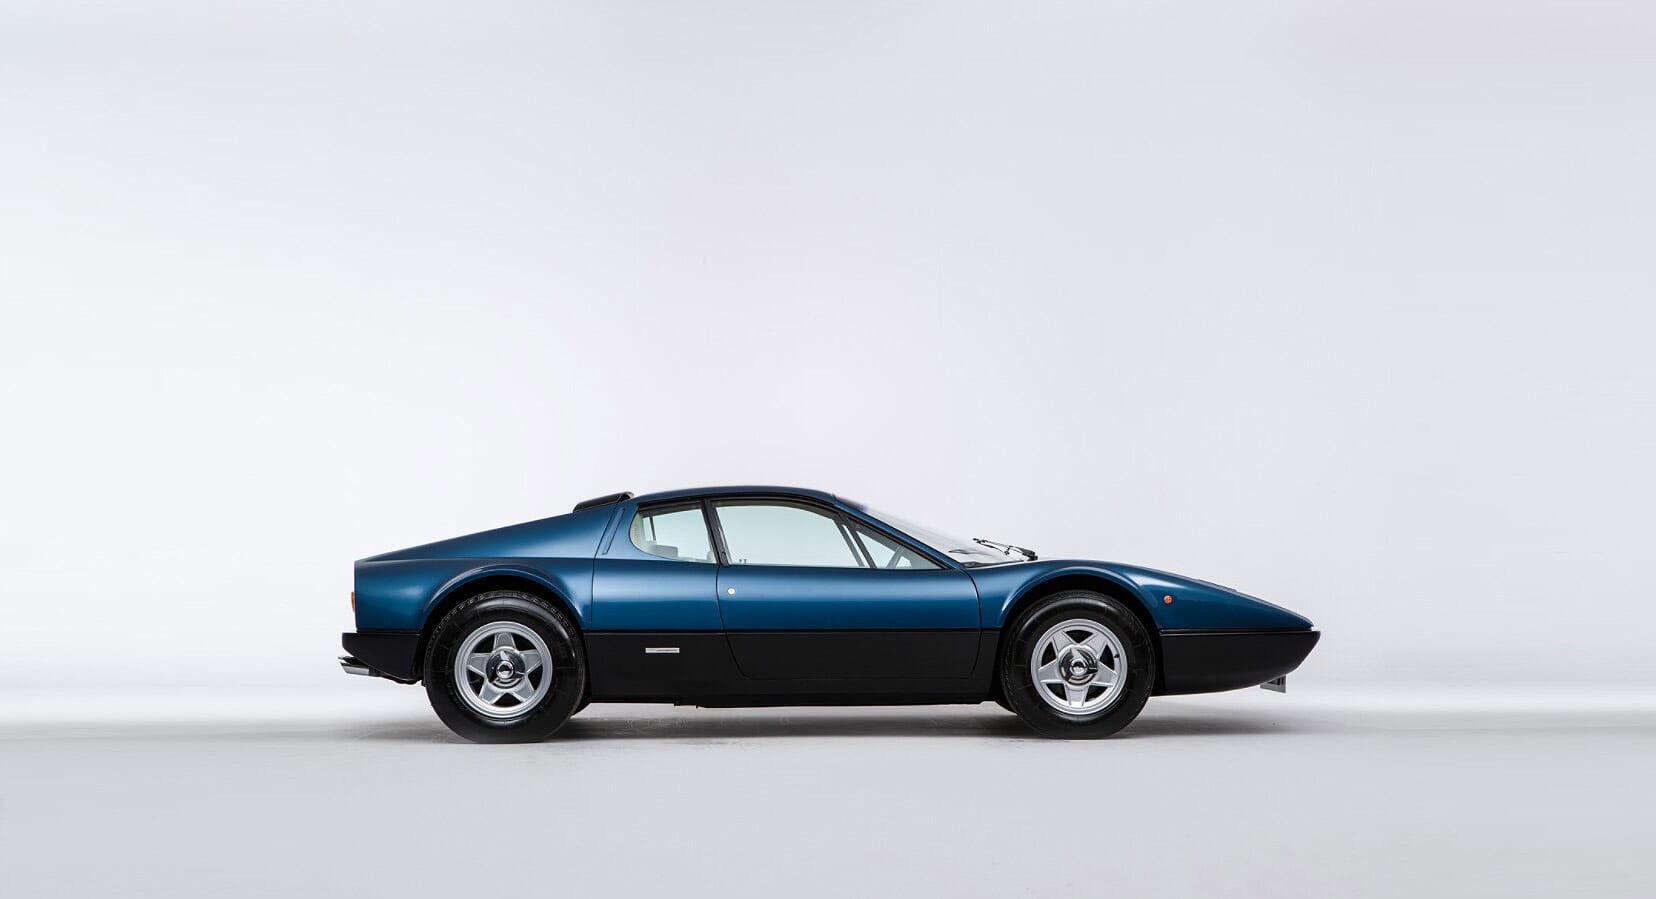 Fast Classics Is Offering Up An Incredibly Special Ferrari 365 GT4/BB